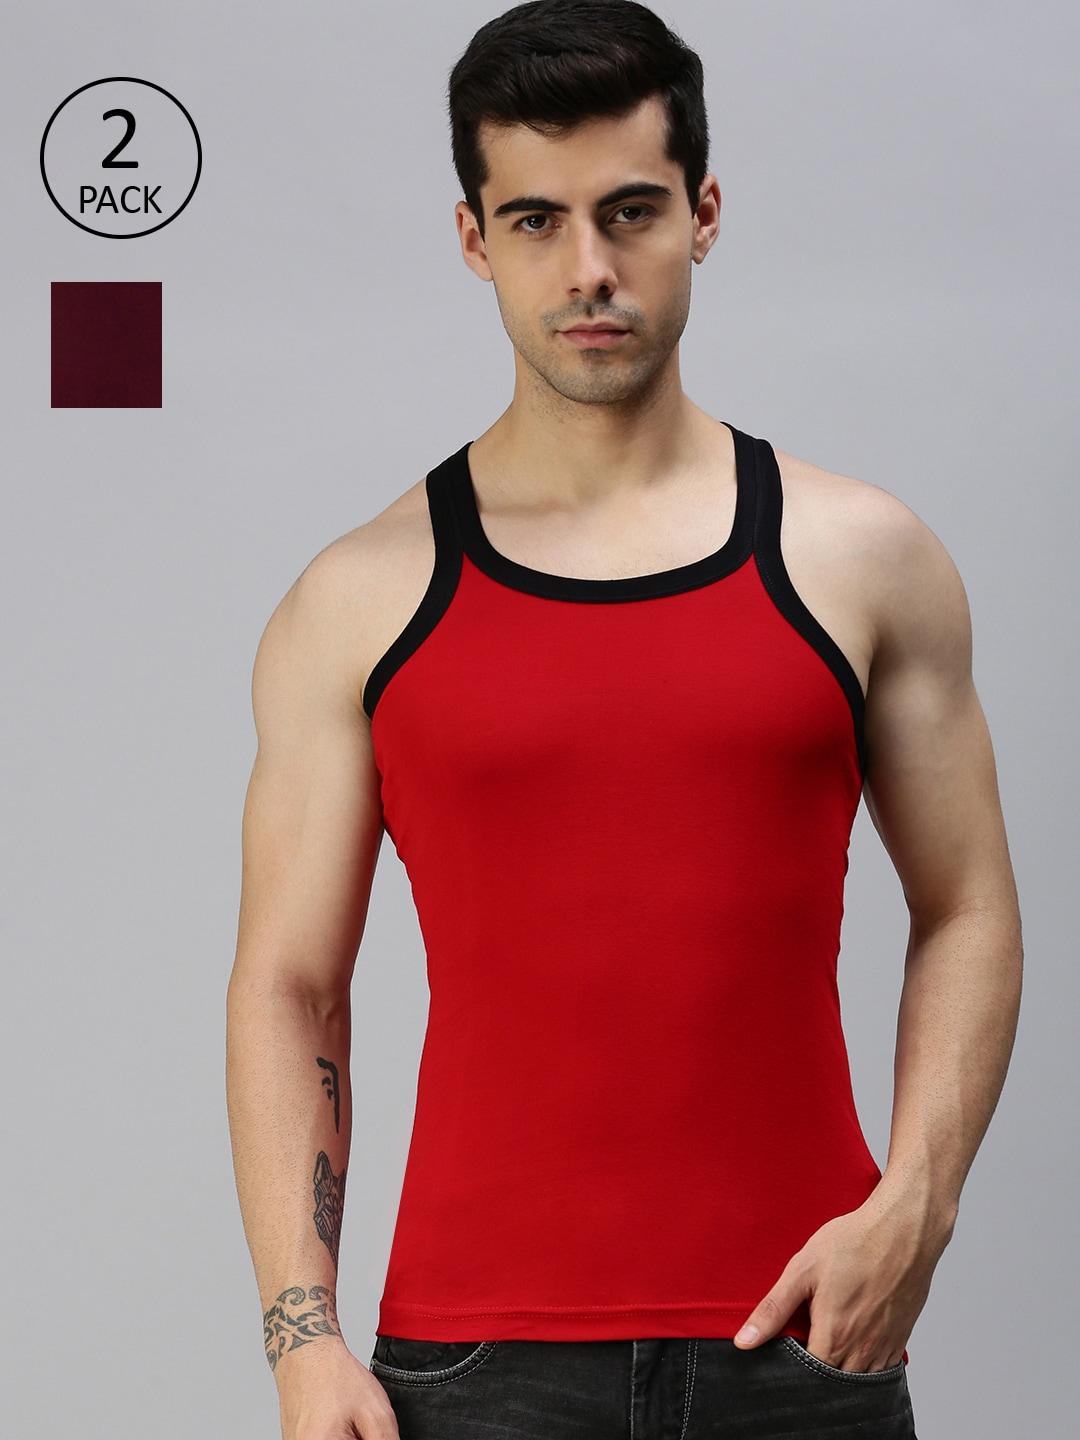 lux cozi men pack of 2 red and maroon solid cotton innerwear vests